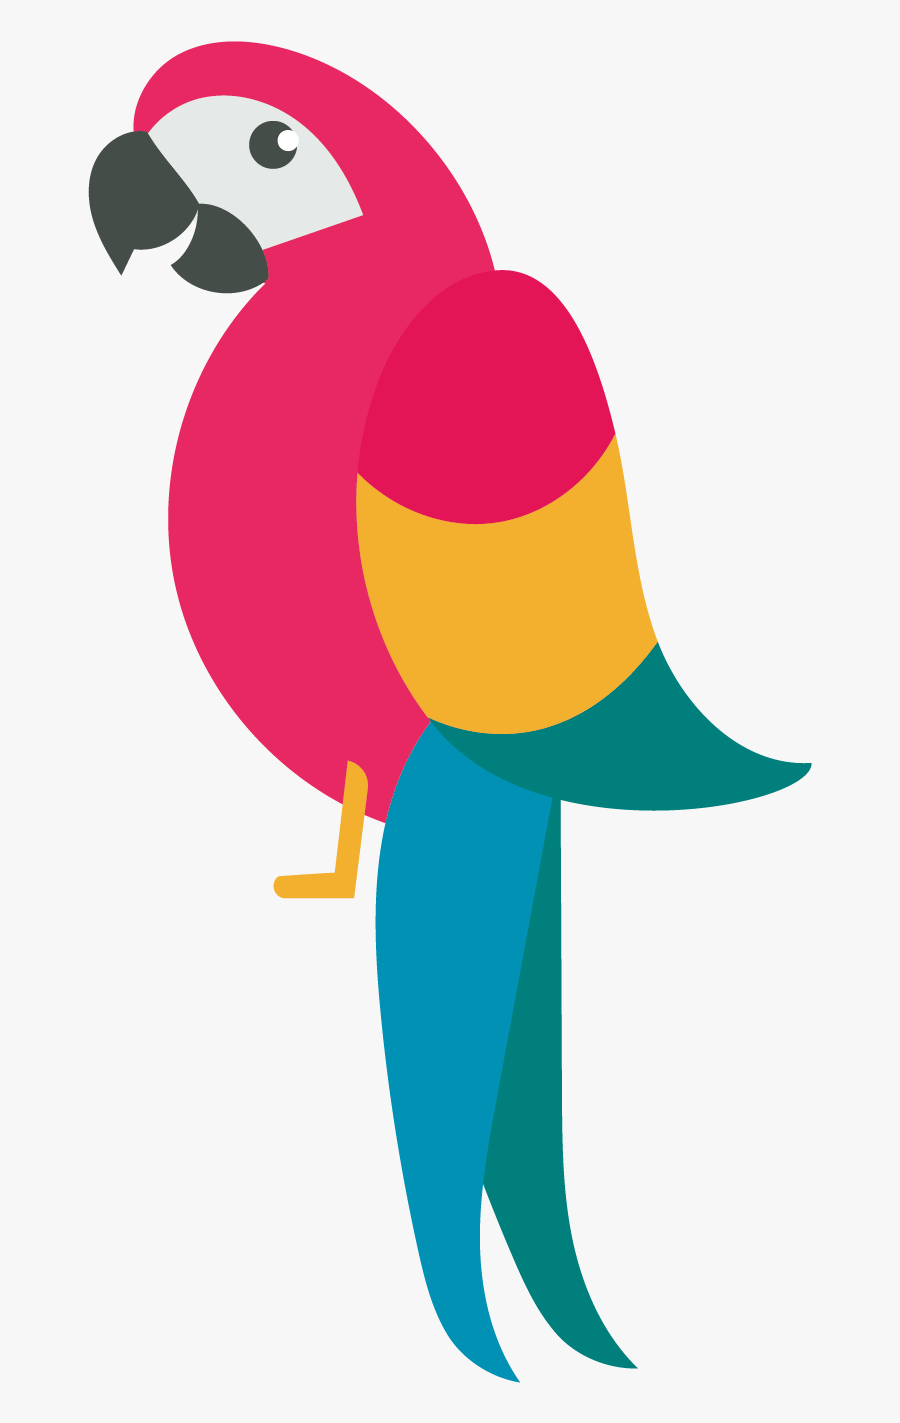 Parrot Drawing - Parrot Drawing Cute, Transparent Clipart